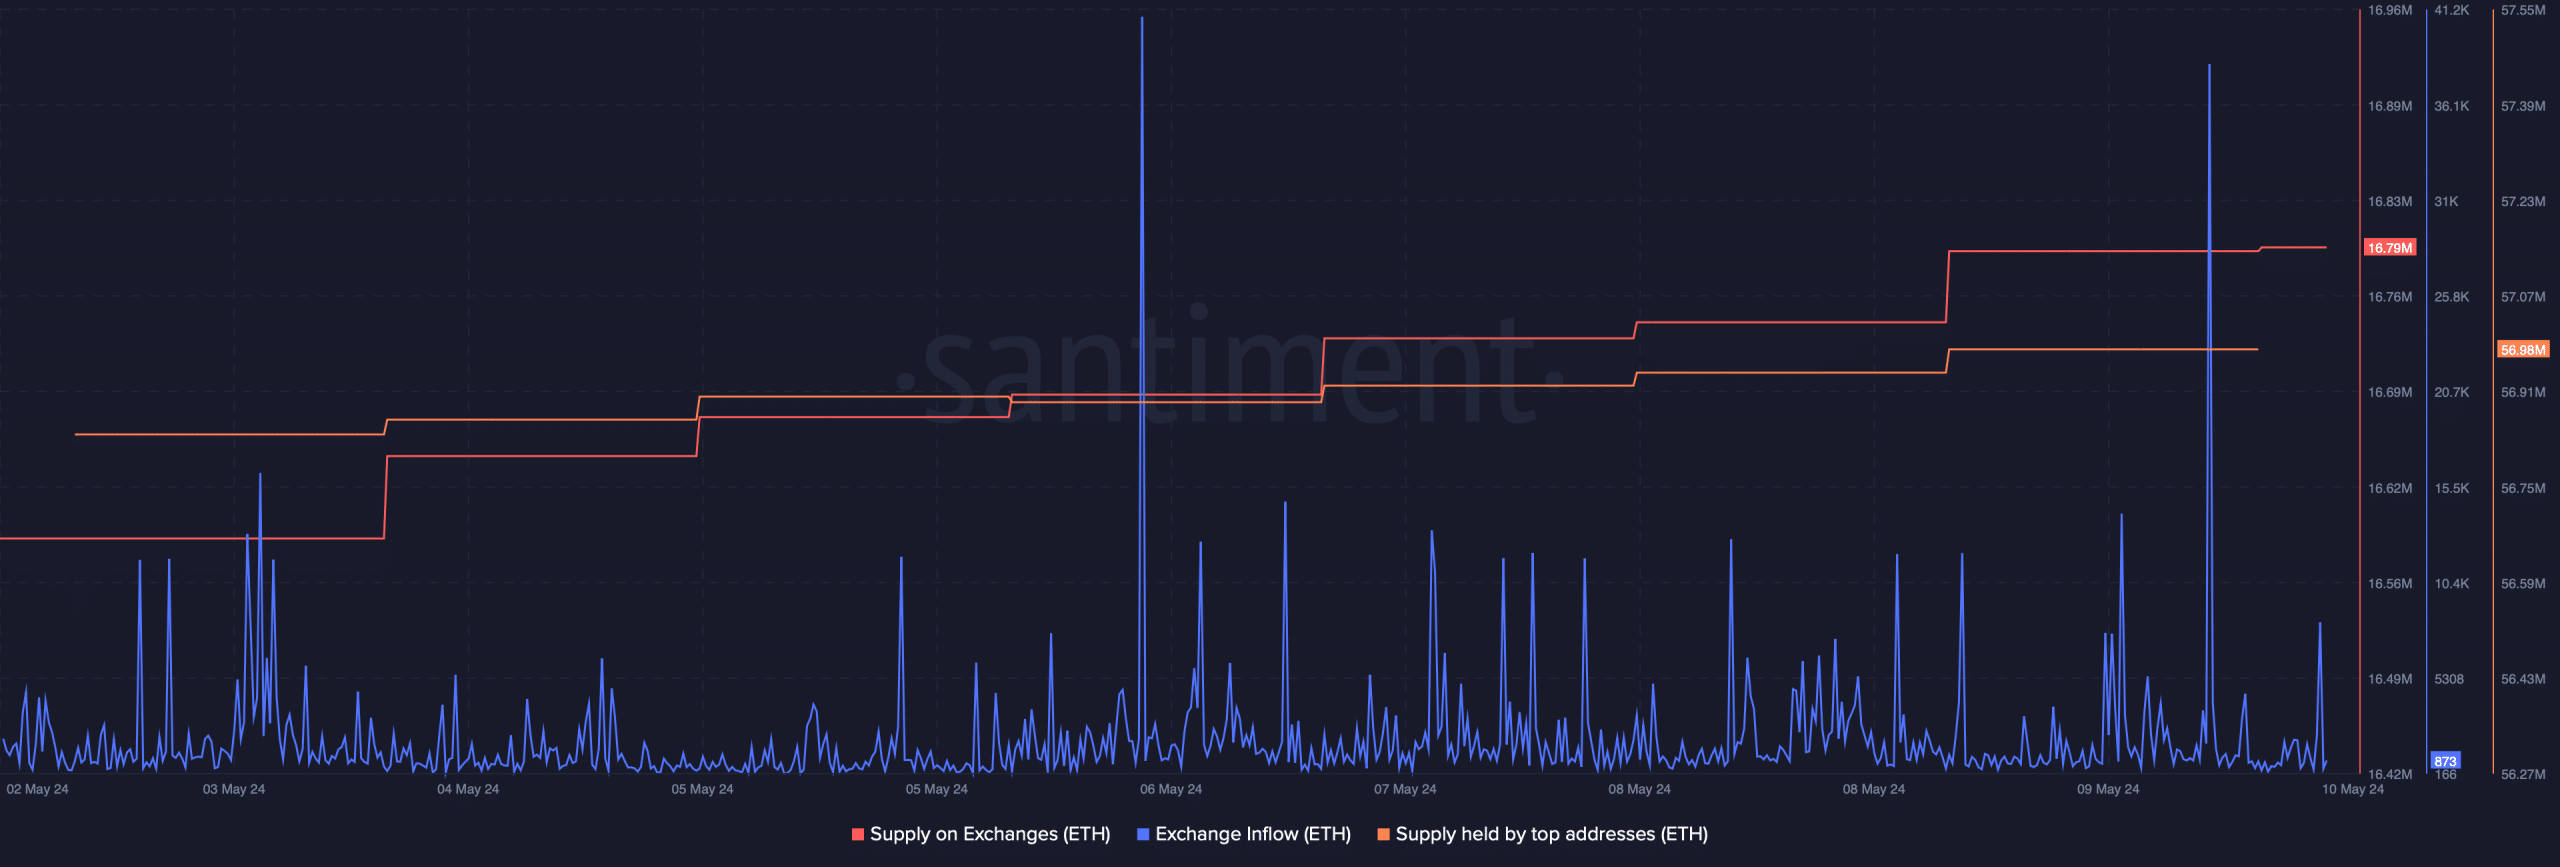 ETH's exchange inflow spiked